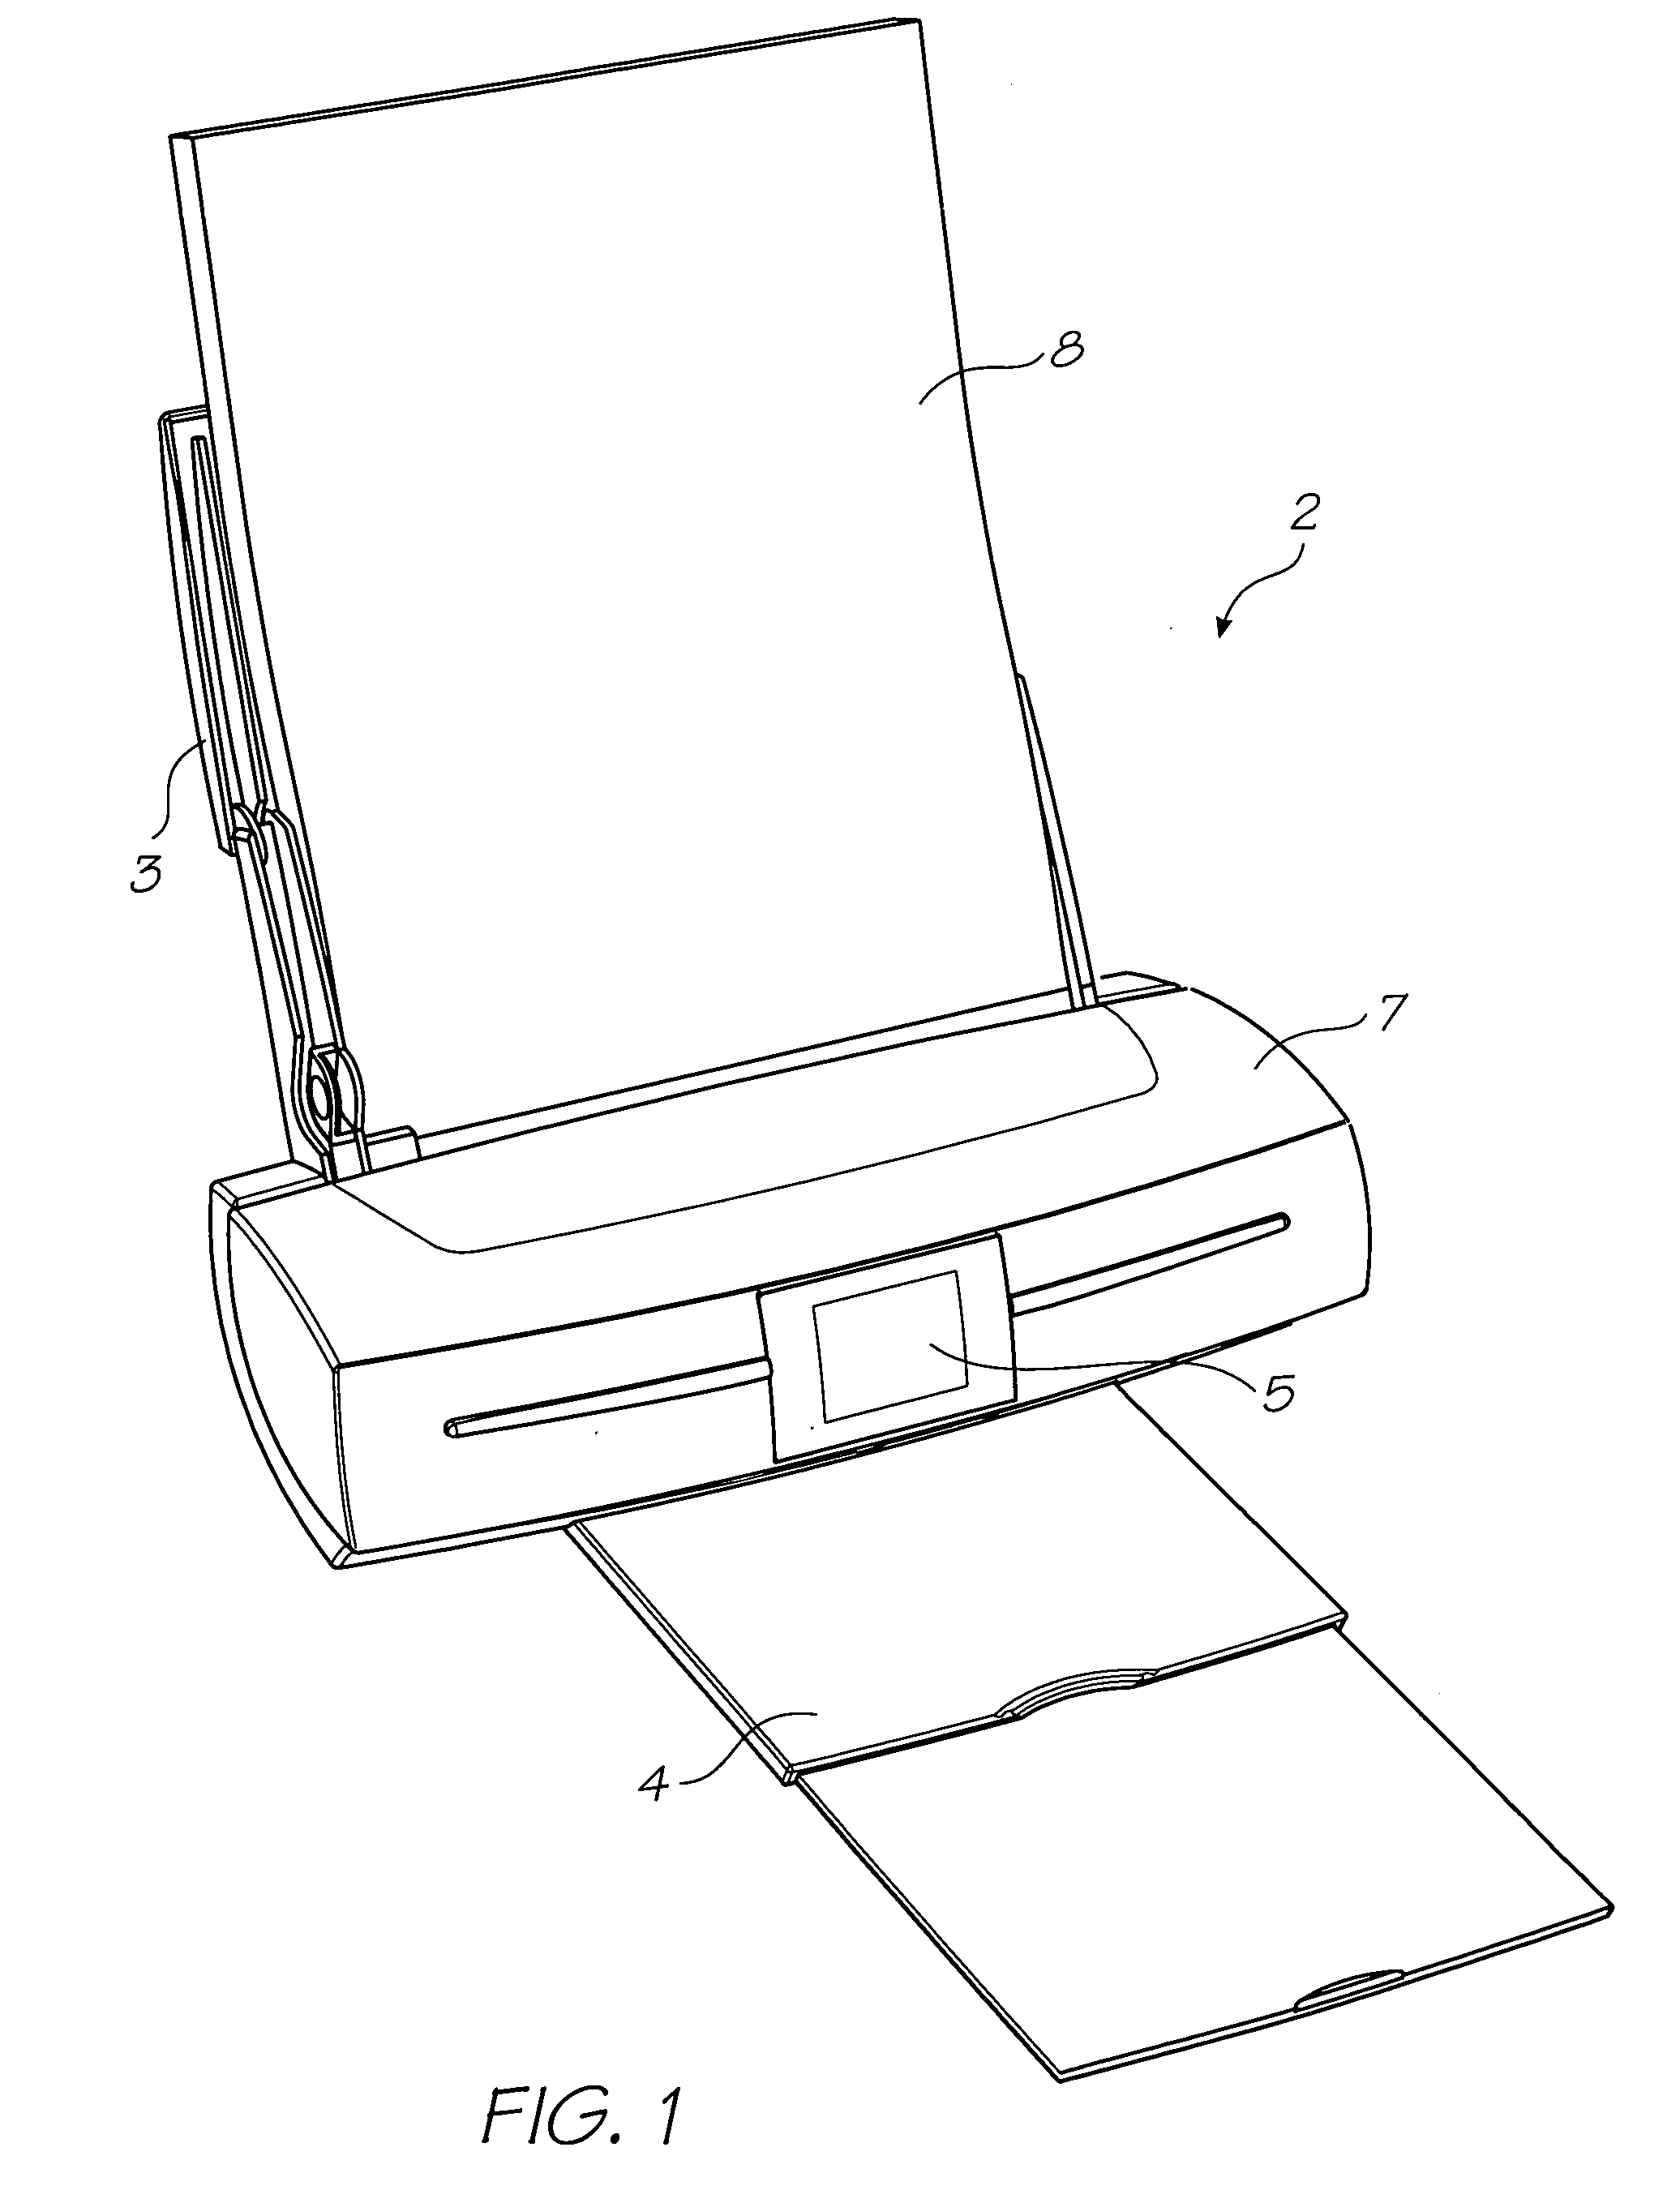 Printhead cartridge with bracing for reducing structural deflection